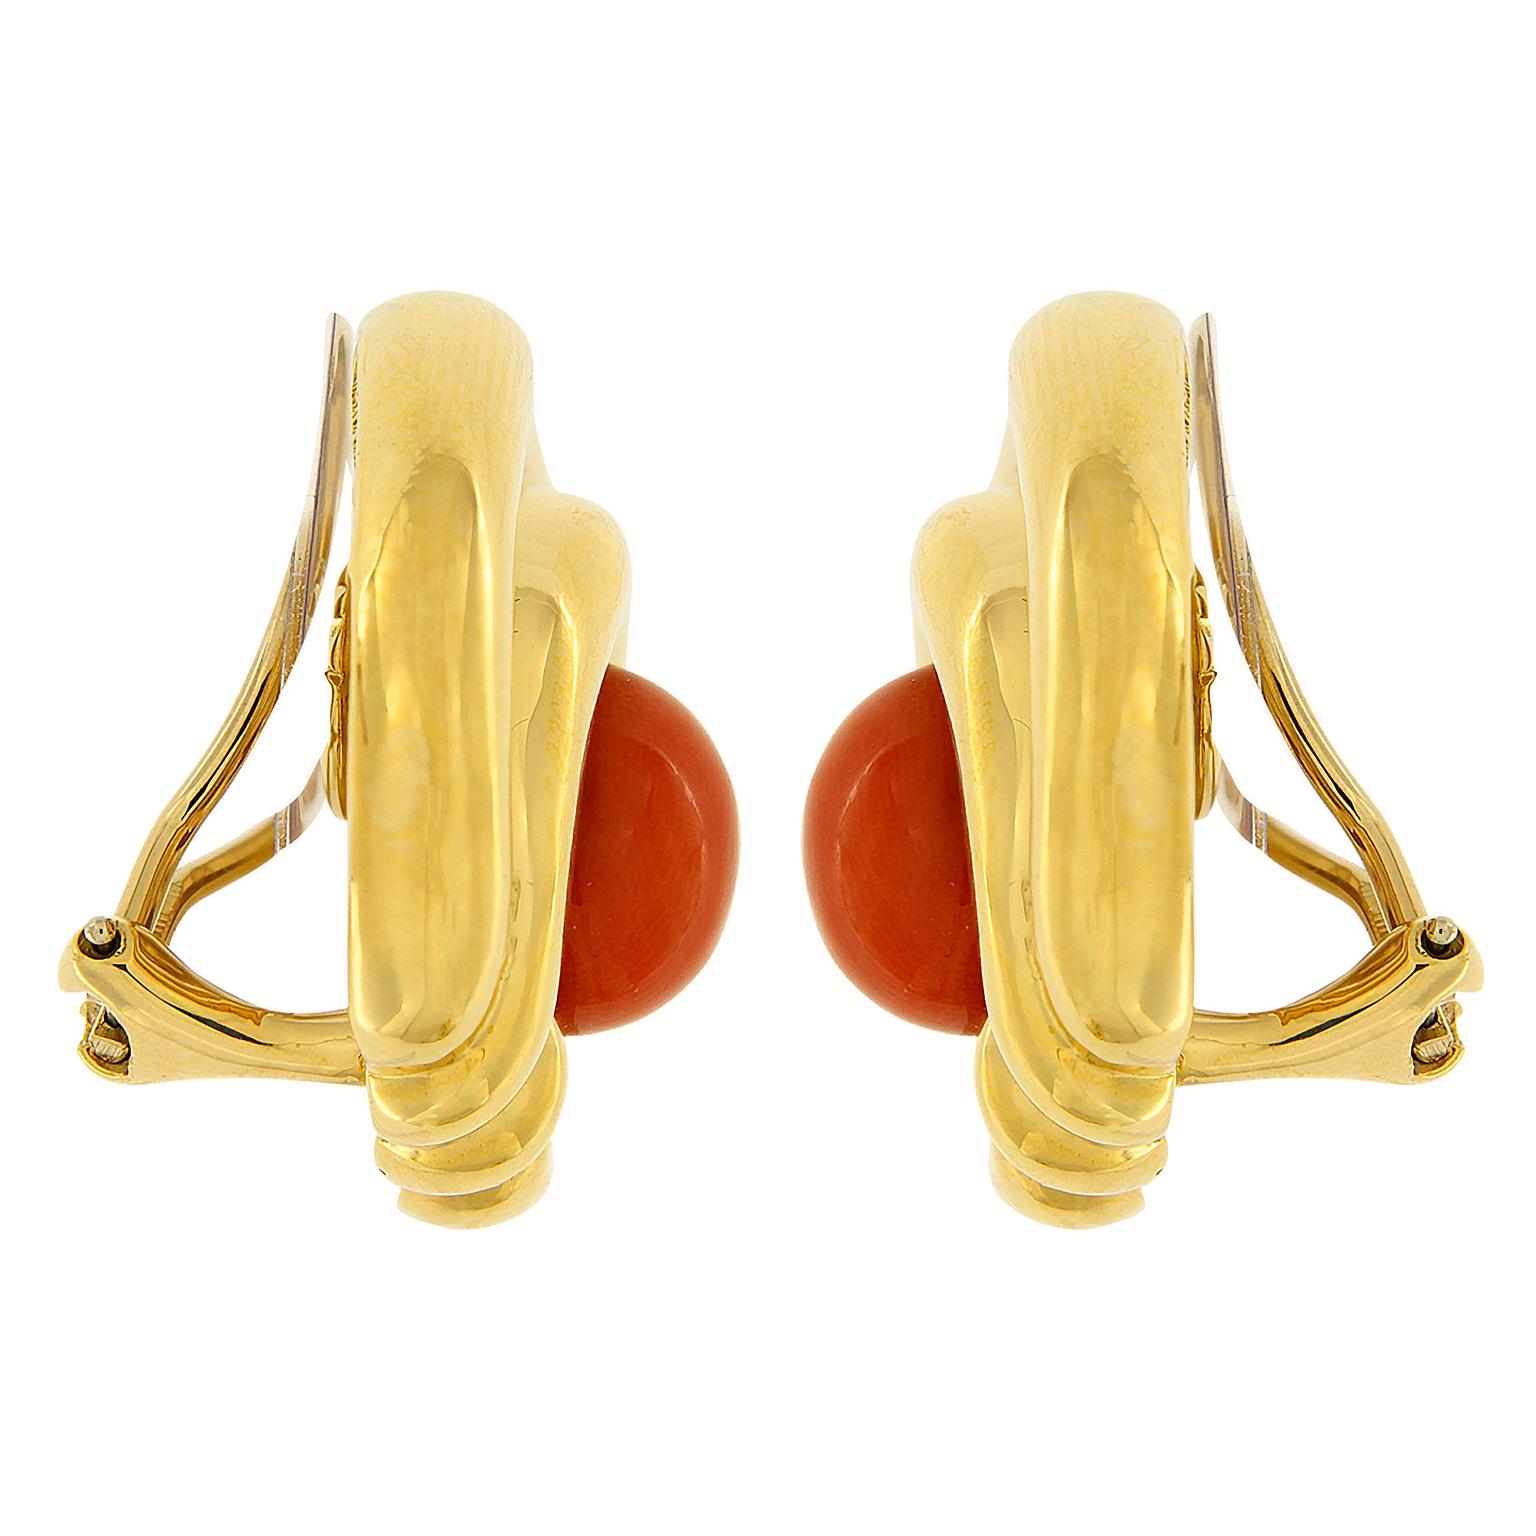 Coral and gold come together in these earrings created by Valentin Magro. In the middle is coral carved into 11mm by 9mm oval cabochons. Wrapping around the jewels are 18k yellow gold with an overhand knot on the bottom. The precious metal curves up